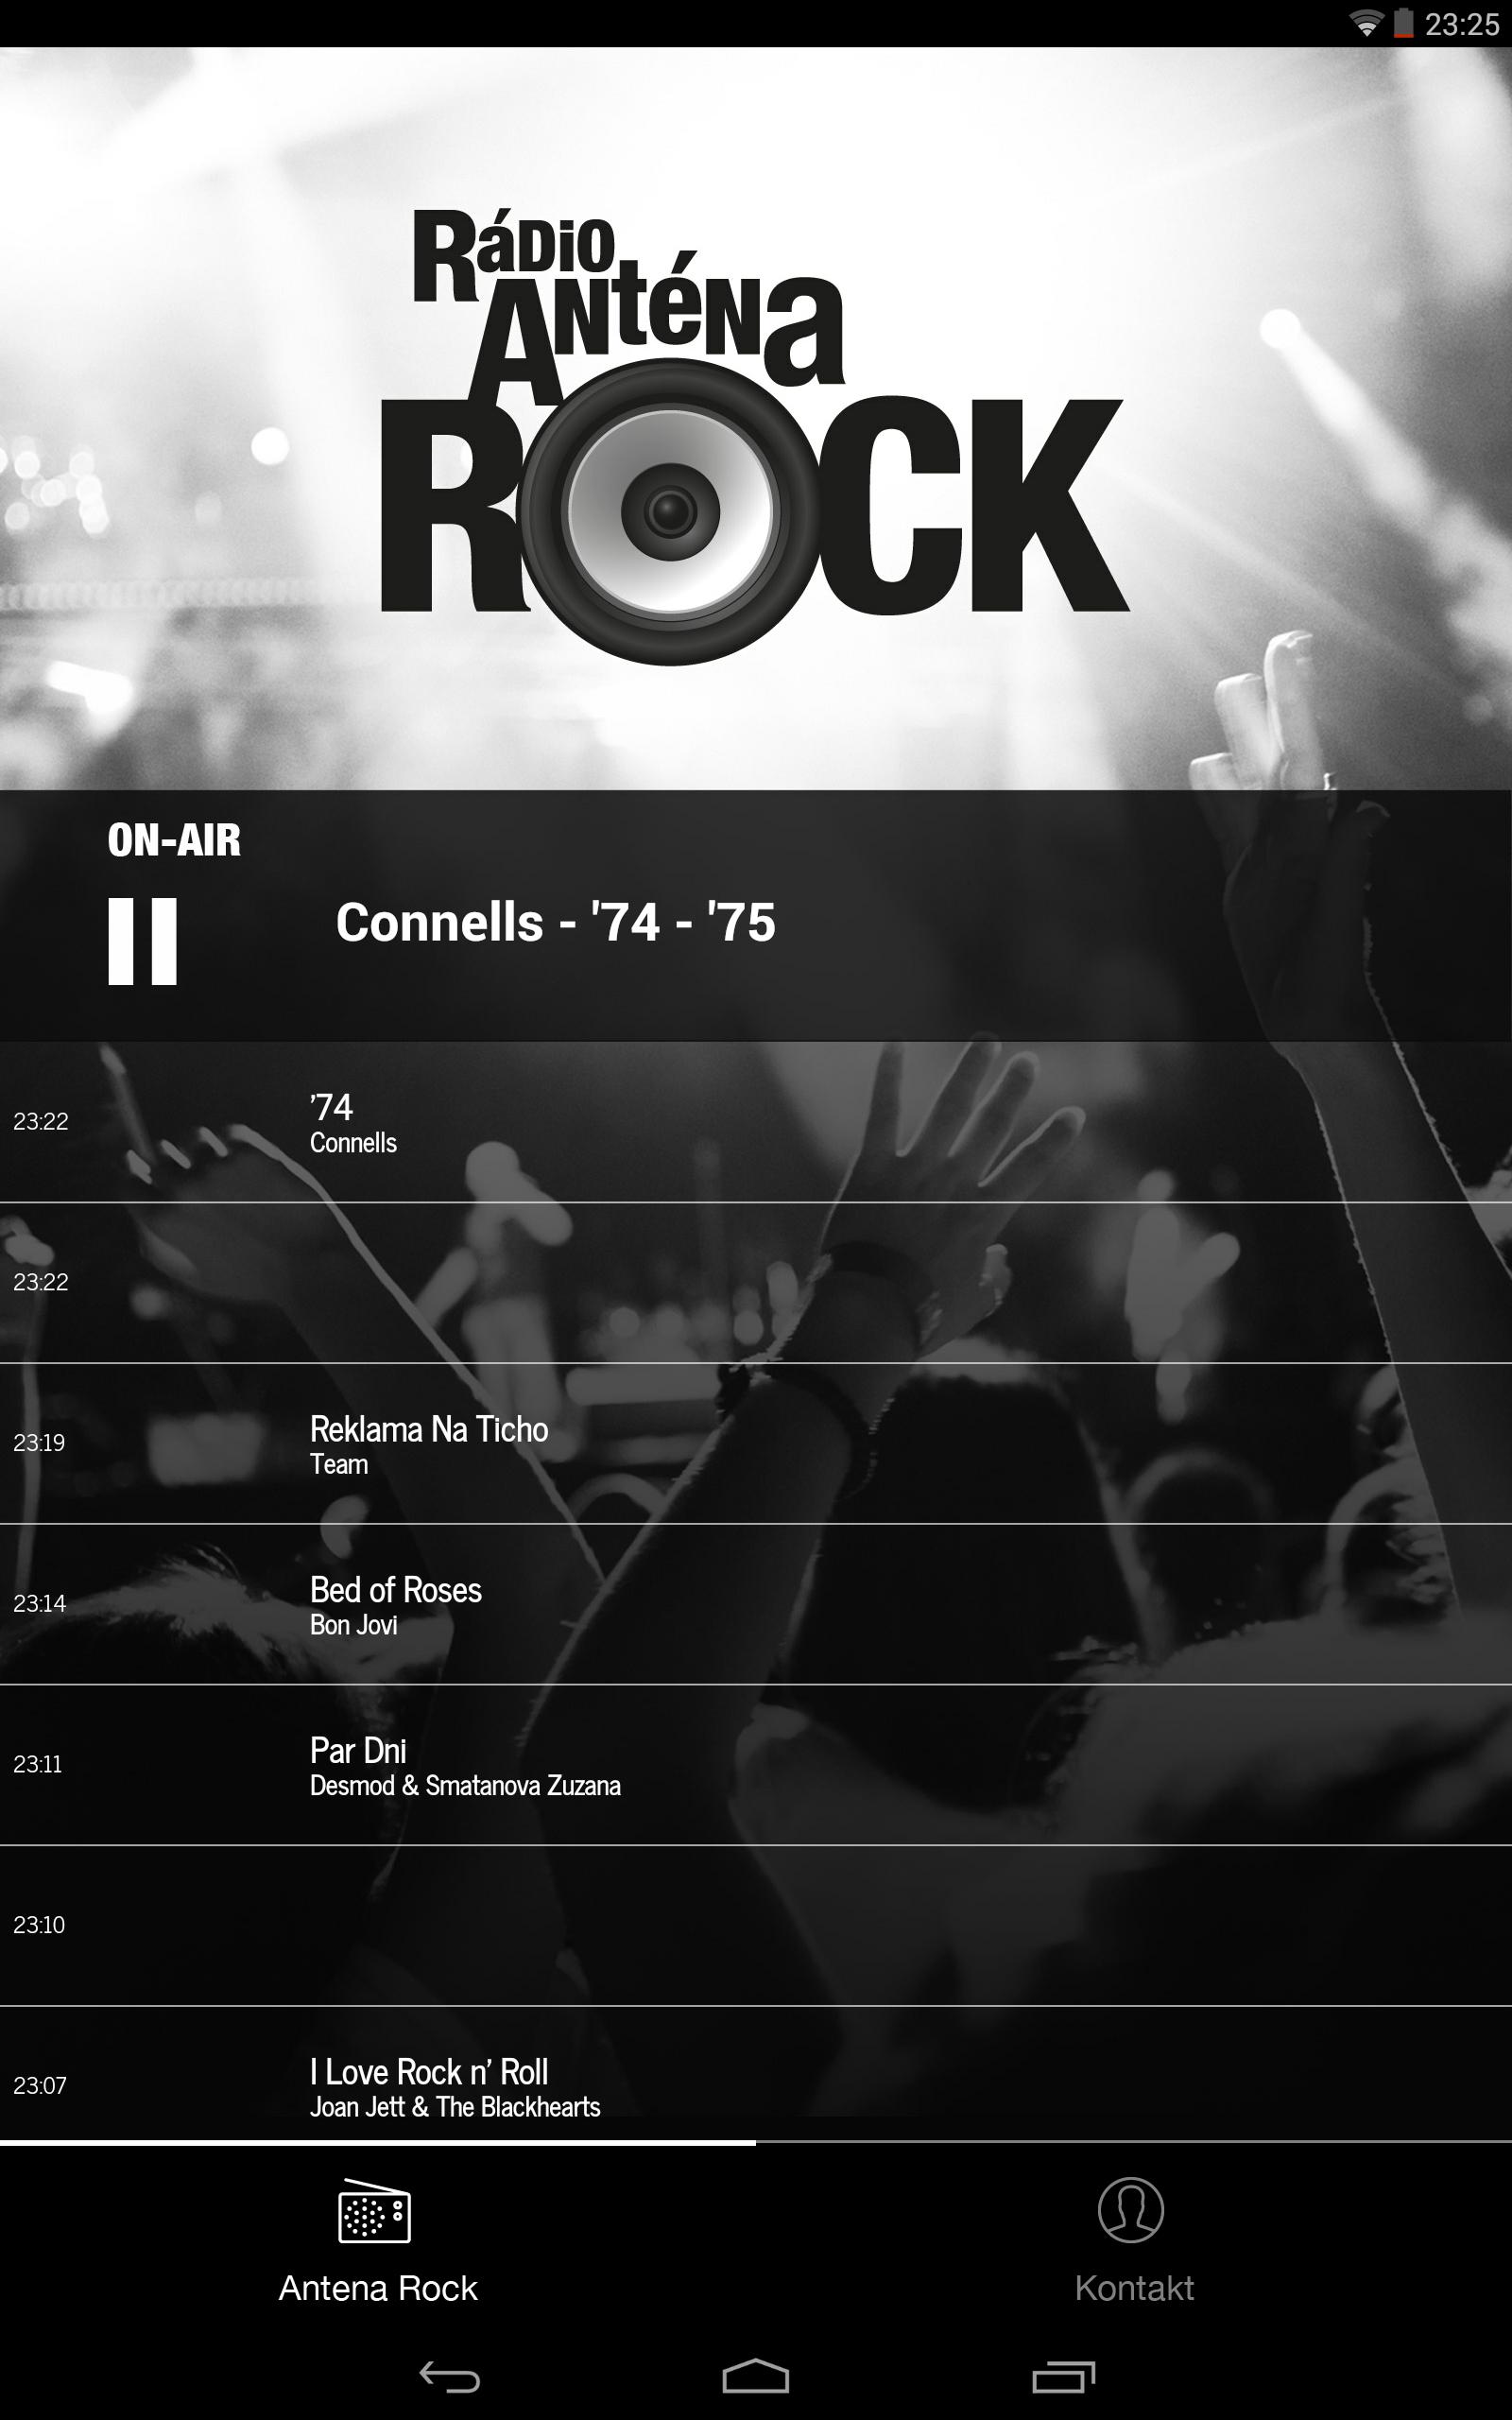 Radio Antena Rock for Android - APK Download